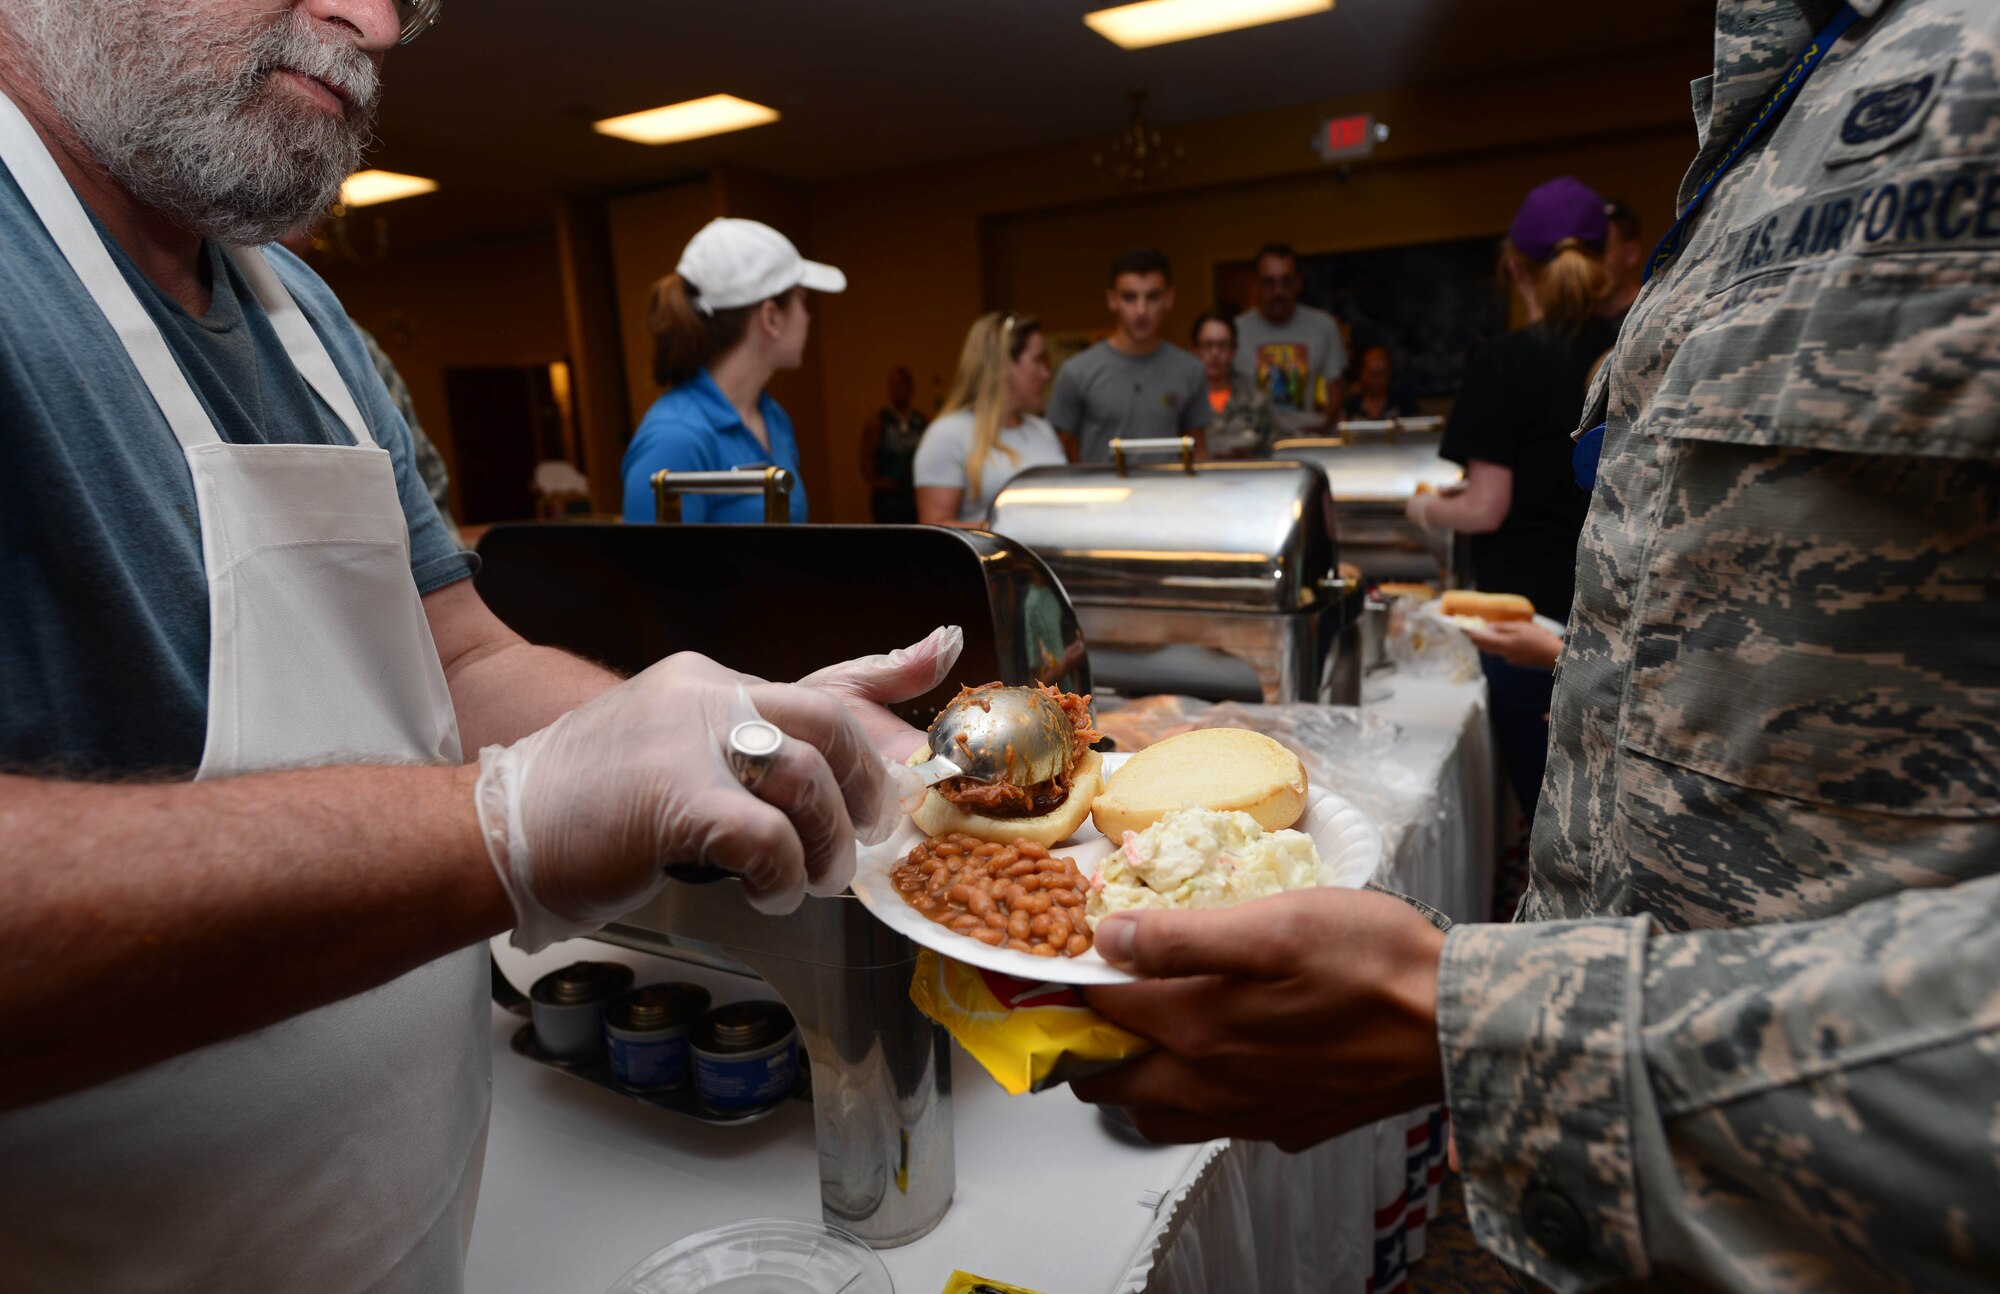 An Airman serves food in the Dakota’s Club during the annual base picnic at Ellsworth Air Force Base, S.D., June 30, 2017. During the picnic, families were served hotdogs, pulled pork sandwiches, coleslaw, beans and chips as well as a variety of drinks. (U.S. Air Force photo by Airman 1st Class Donald C. Knechtel)